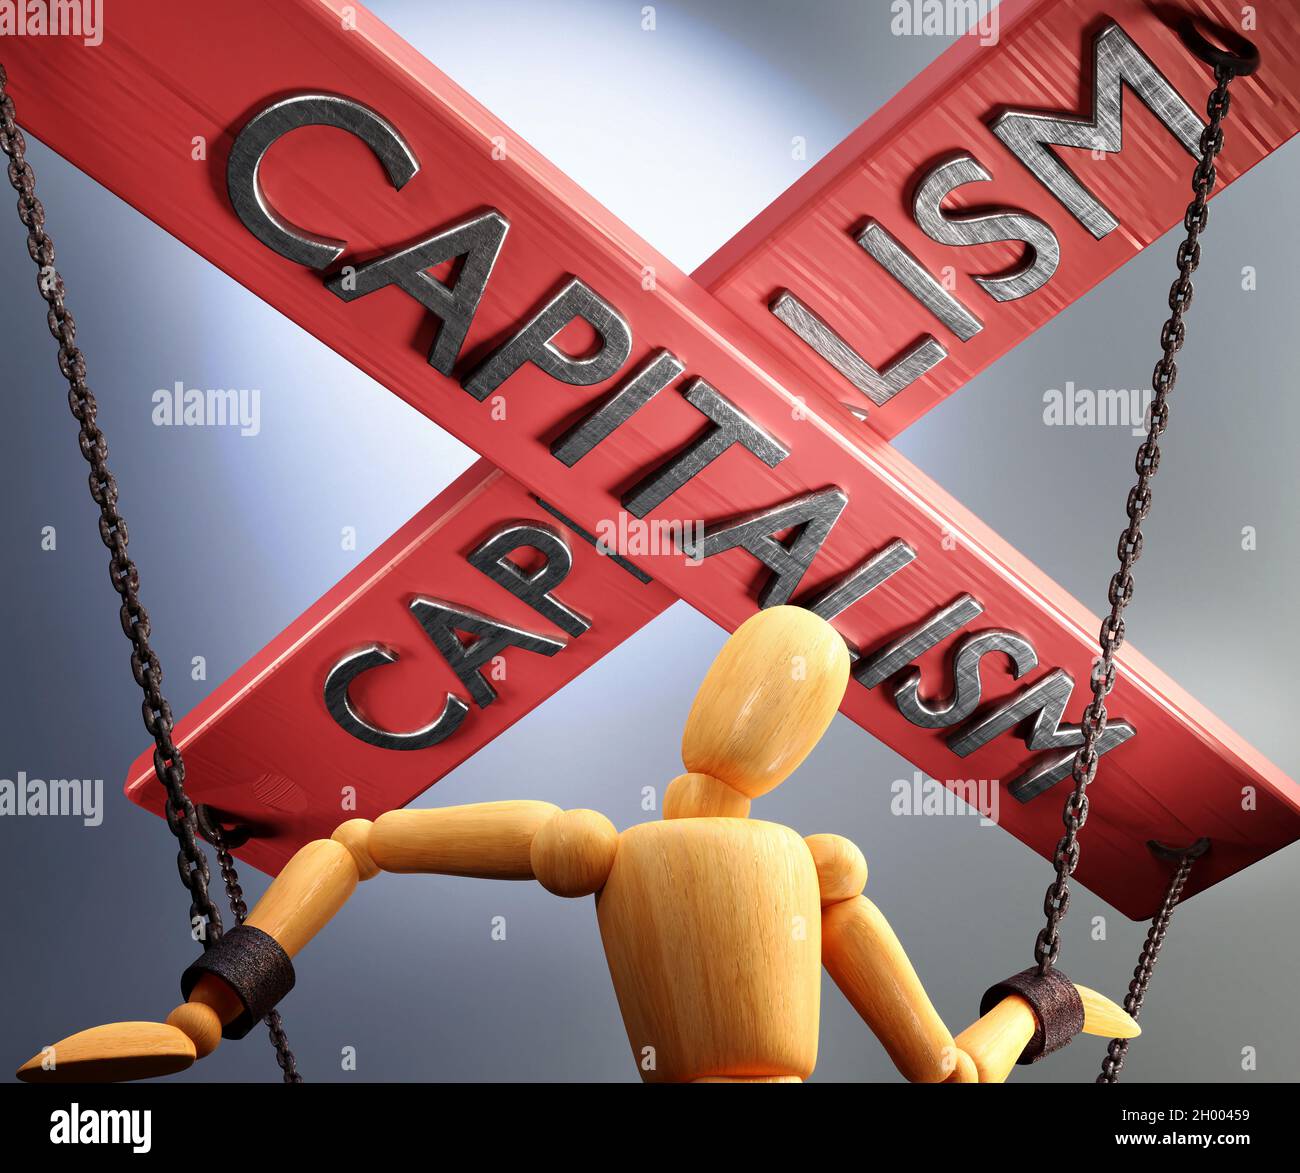 Capitalism control, power, authority and manipulation symbolized by control bar with word Capitalism pulling the strings (chains) of a wooden puppet, Stock Photo